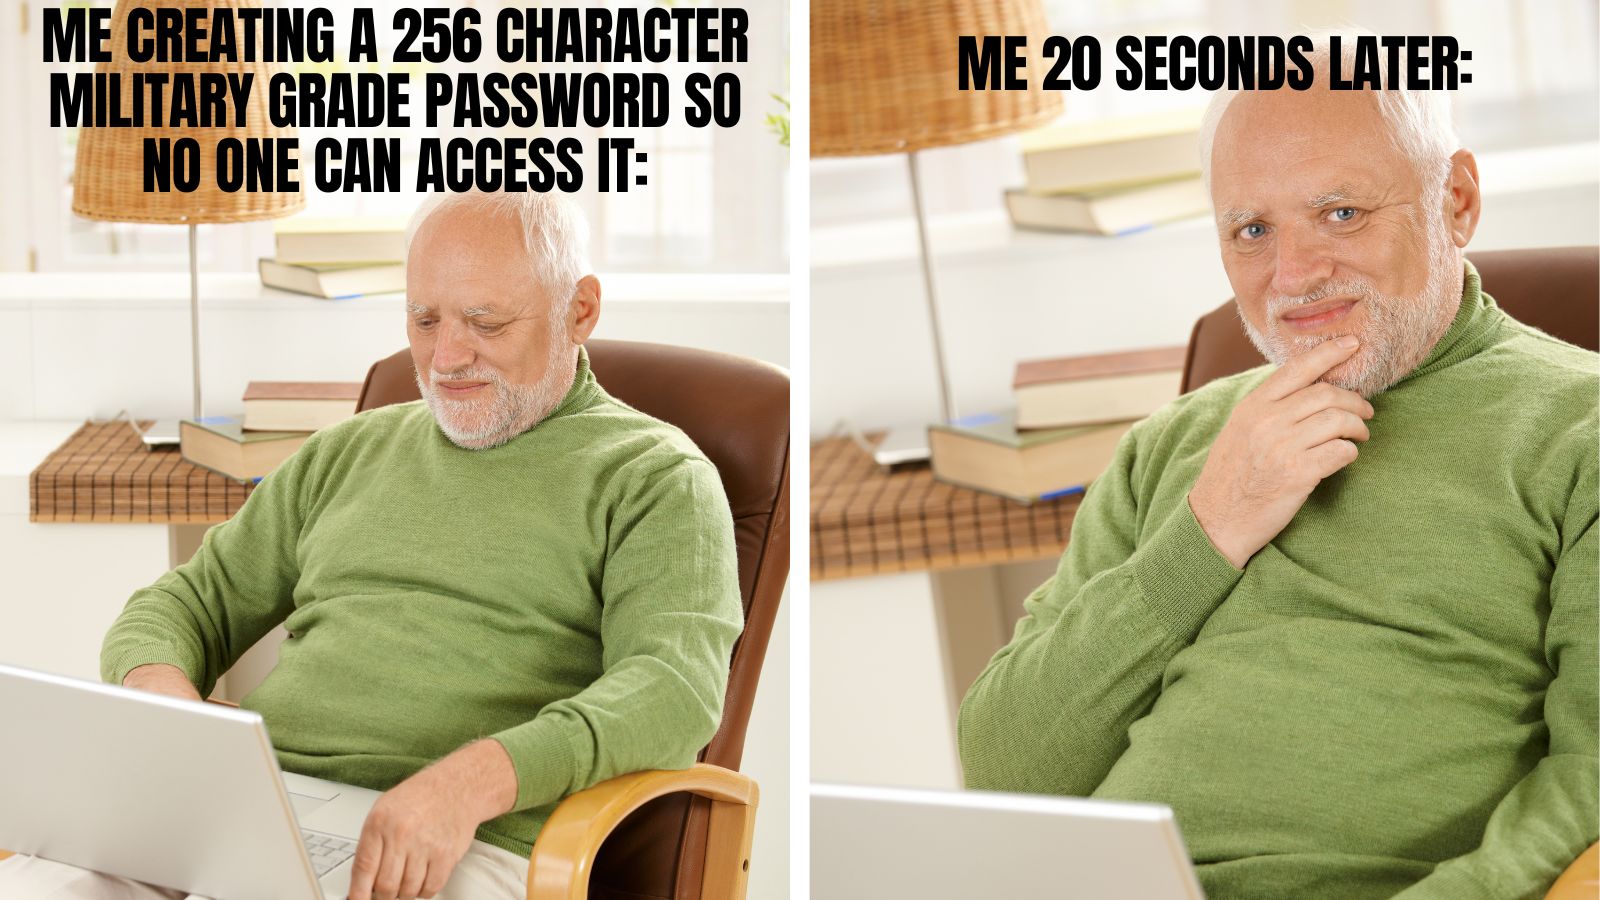 meme Me When I am creating a Password Vs. Me 20 seconds later...